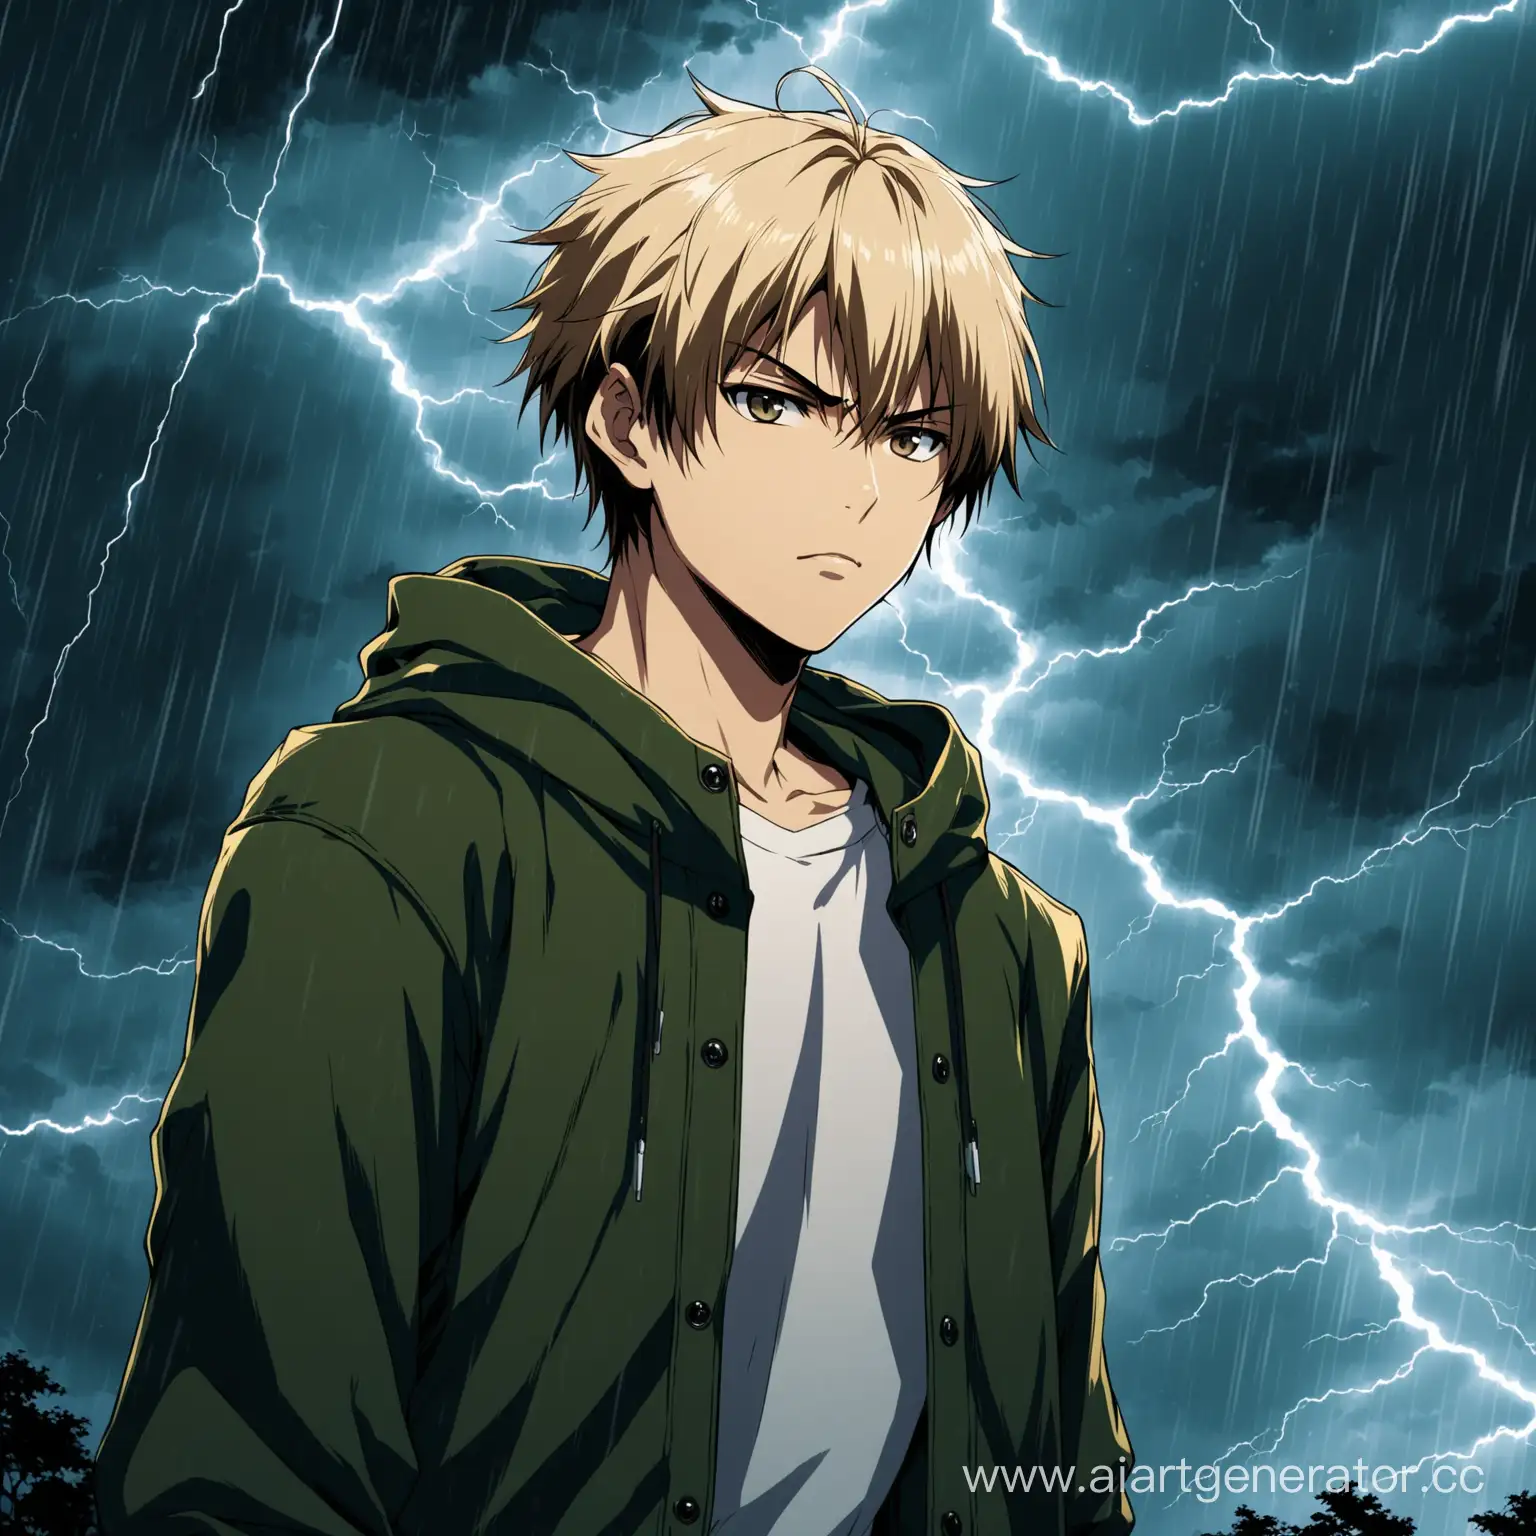 Anime-Style-Portrait-of-a-Young-Man-with-a-Lynx-in-a-Thunderstorm